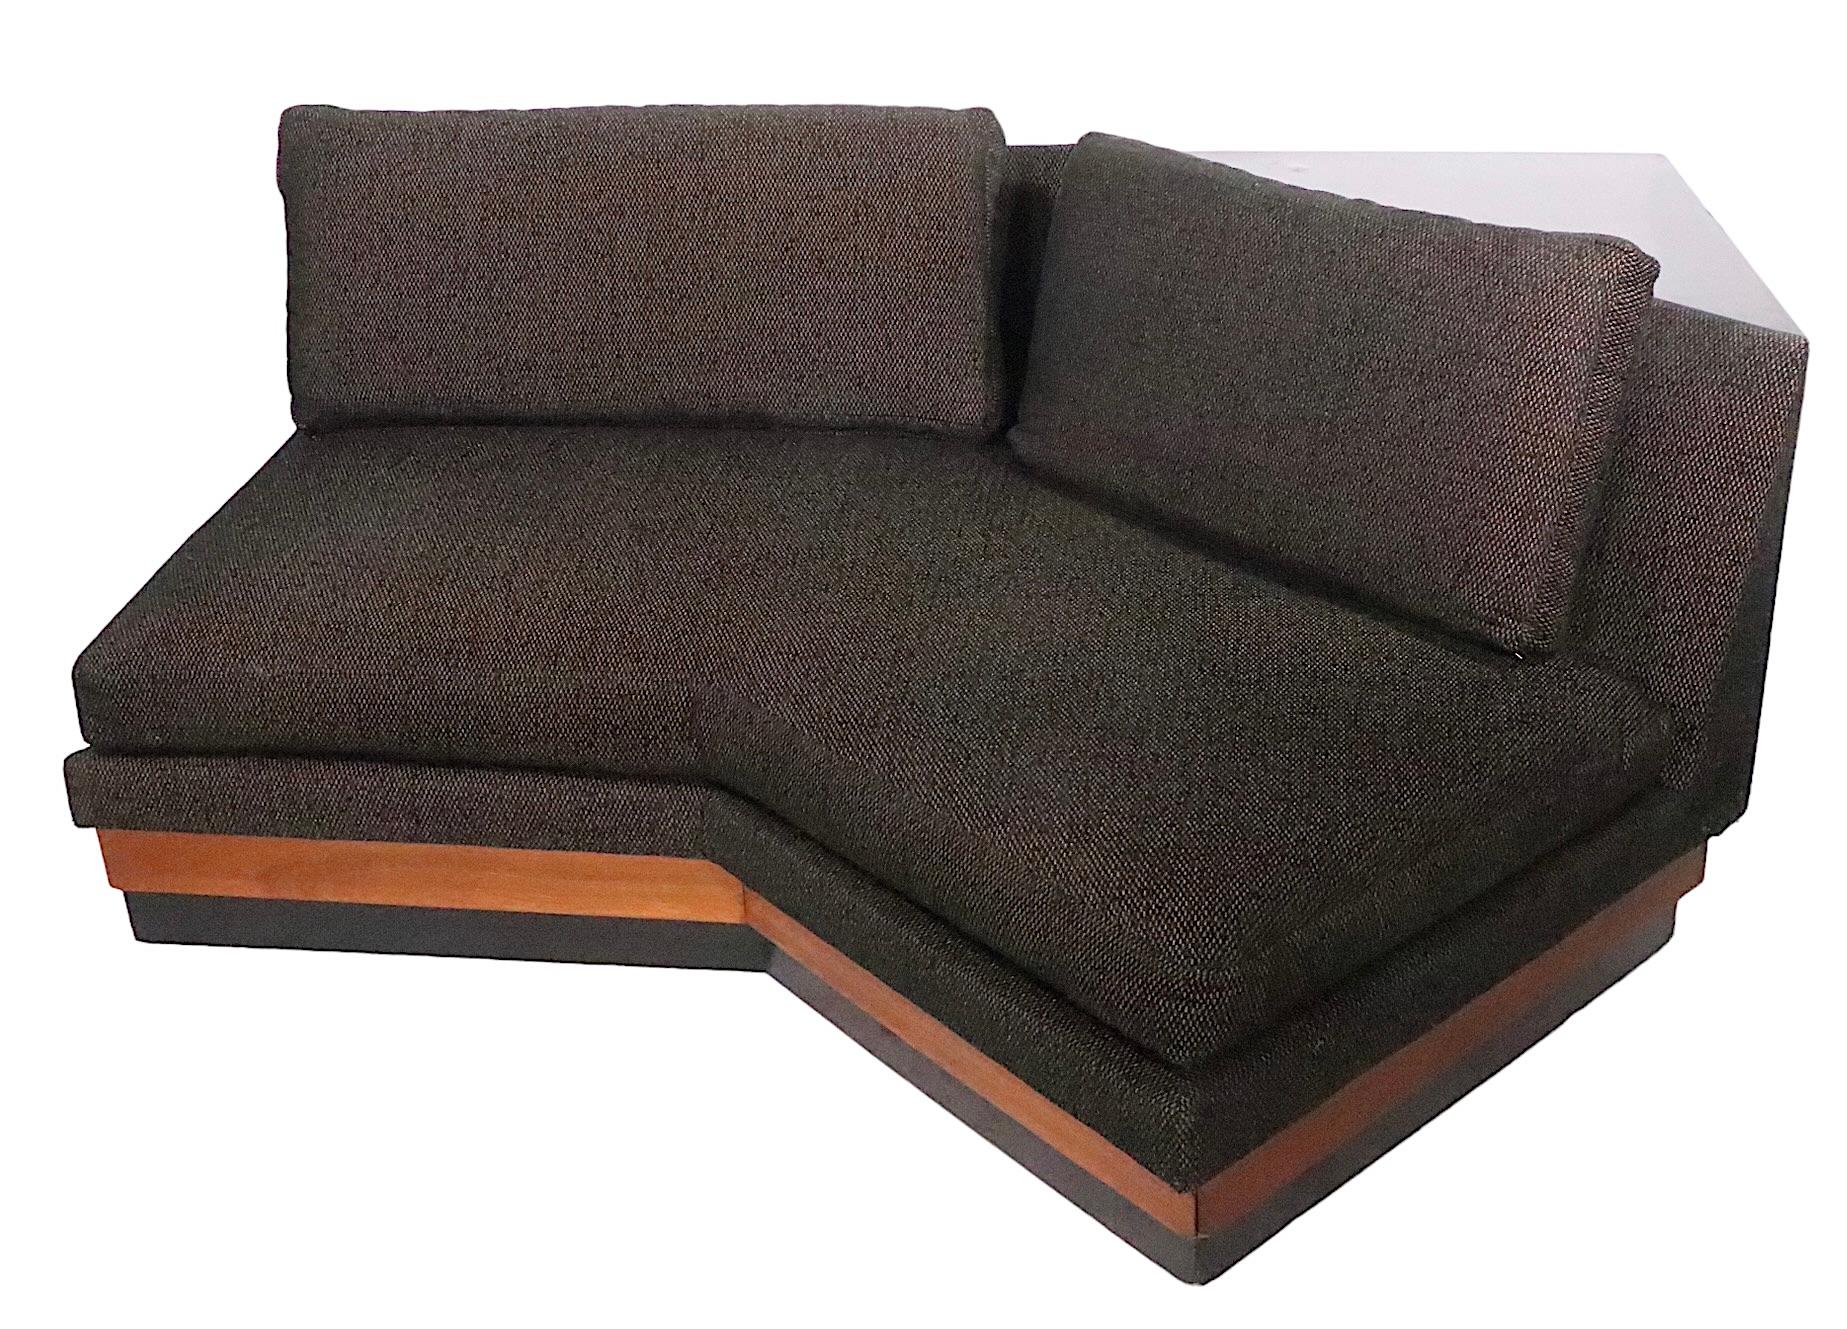 Mid-Century Modern Mid Century Sectional Sofa by Adrian Pearsall for Craft Associates c 1960's For Sale